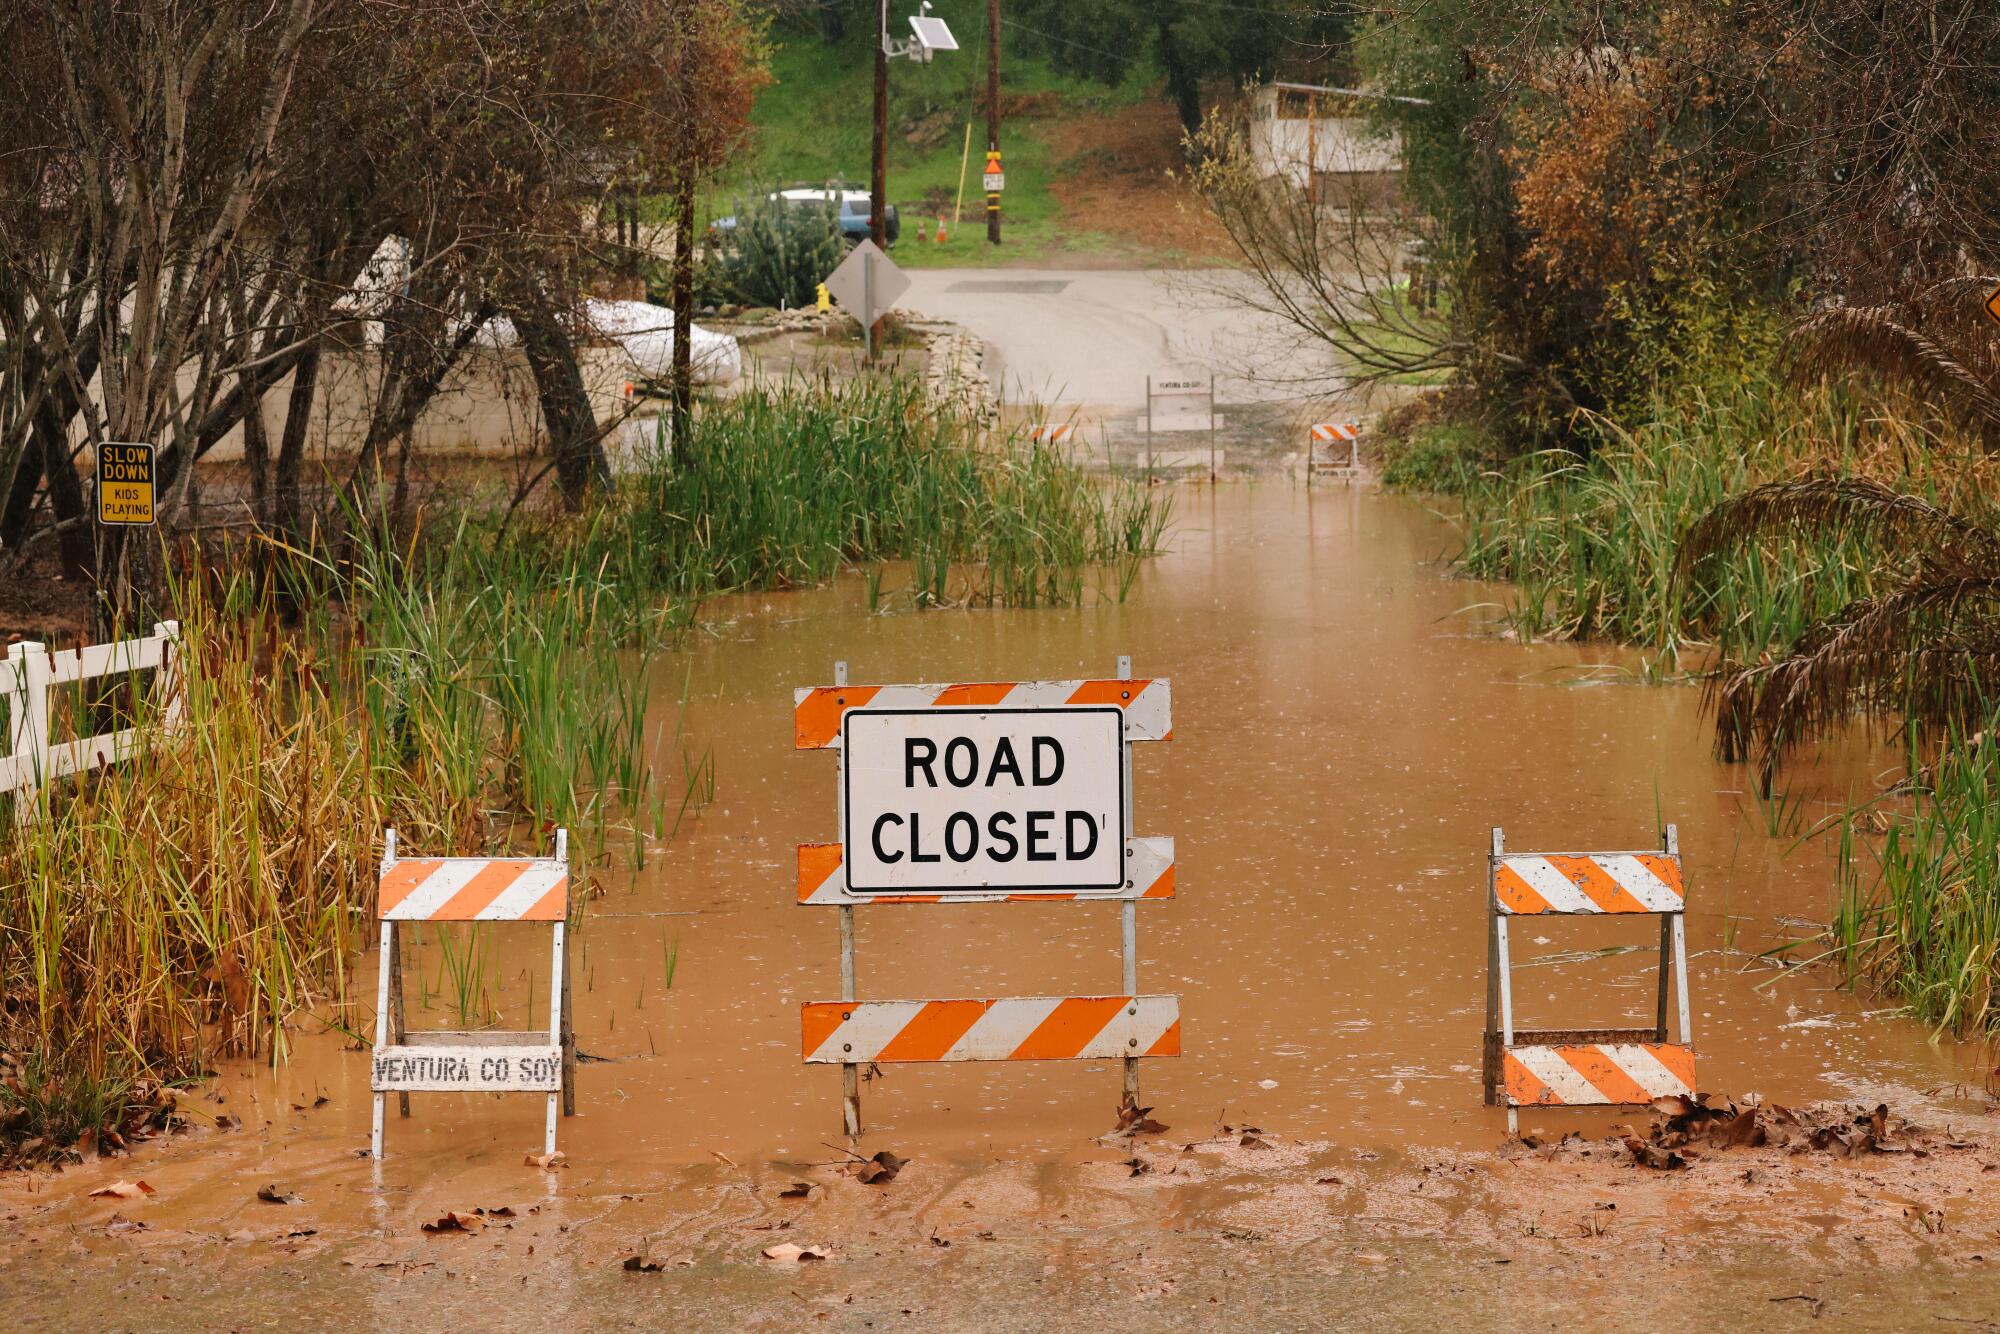 Flooding is seen along Camp Chafee Road at Casitas Vista Road on Sunday in Ventura, California